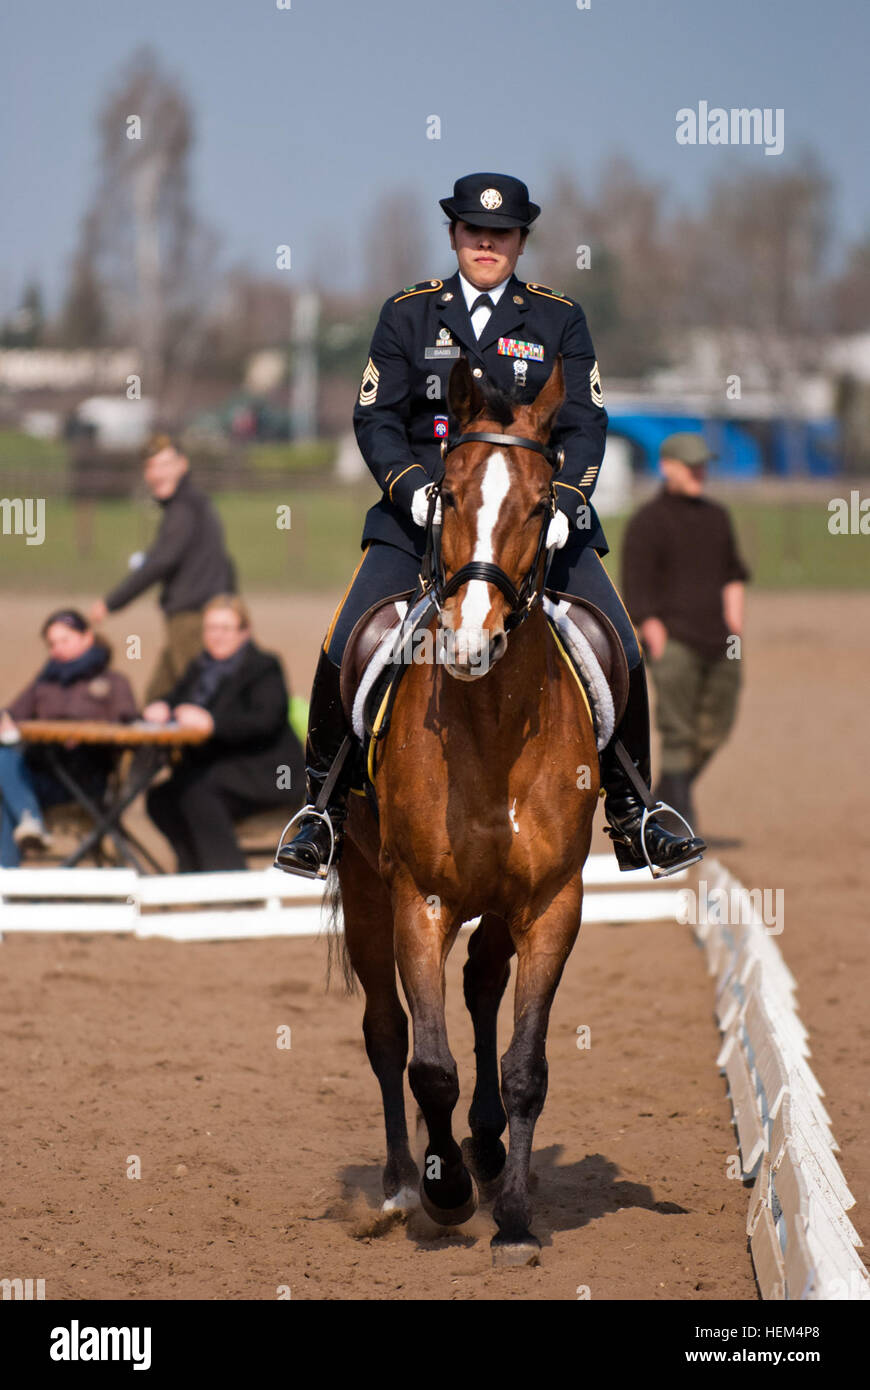 Master Sgt. Cindy Babb, from the U.S. Army Reserve’s 200th Military Police Command, participates in the dressage portion of the 2012 World Cavalry Championships in Poznan, Poland on April 19. Twenty-four competitors from Poland, Germany, United States and other countries competed in the inaugural event that was held April 18-22, 2012. Babb is a training noncommissioned officer based at the Fort Meade, Md. Command. 2012 World Cavalry Championships 561564 Stock Photo